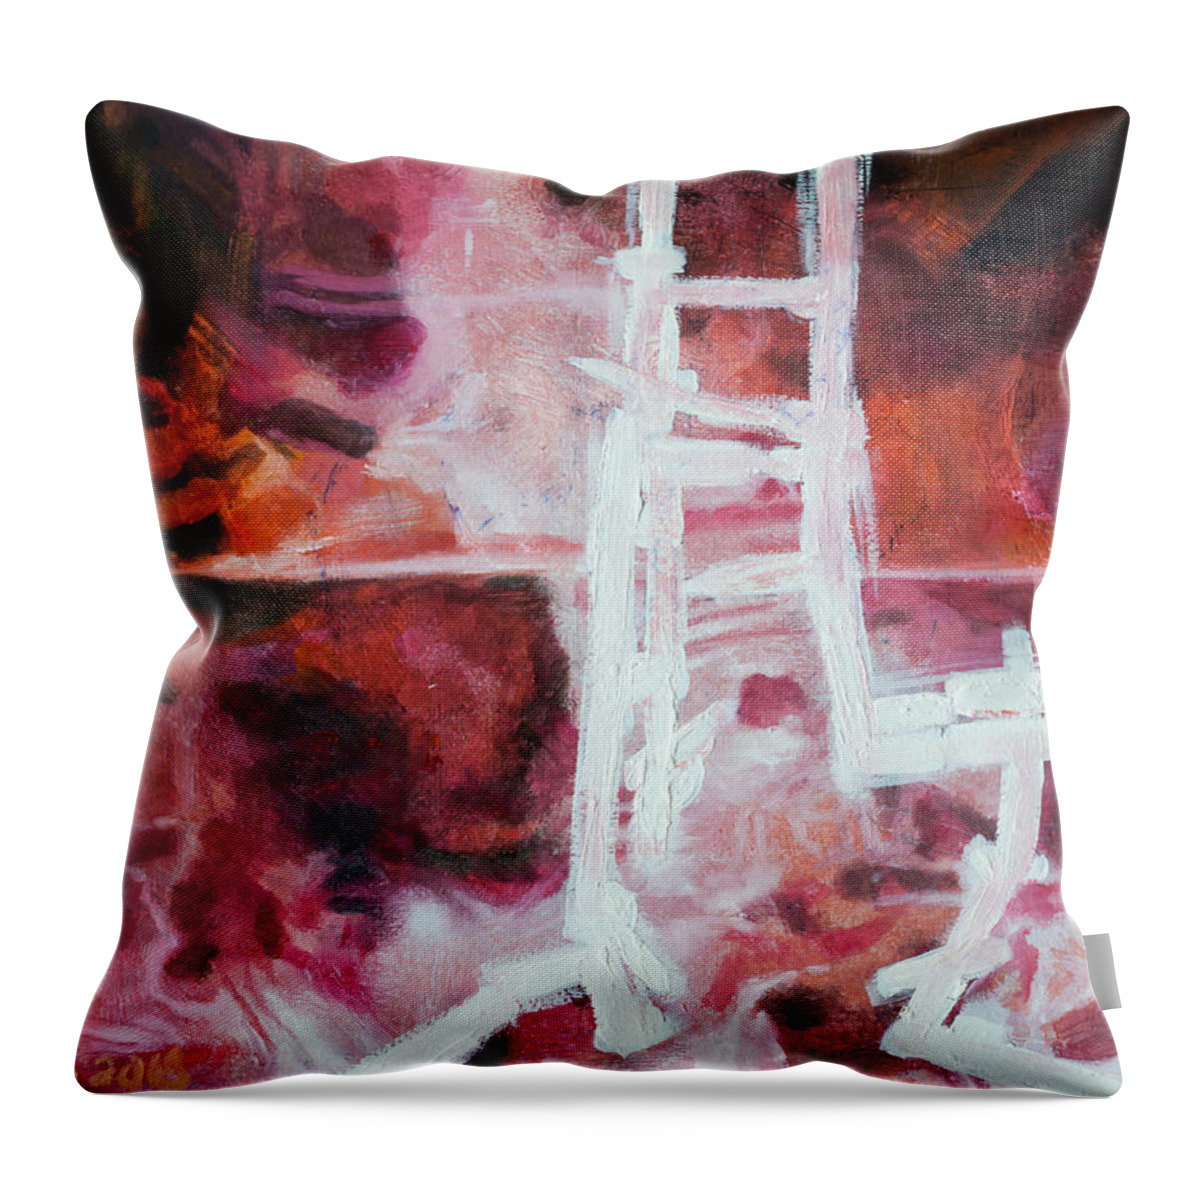 #artwork Throw Pillow featuring the painting Prosthesis and Spine, Study 15 by Veronica Huacuja